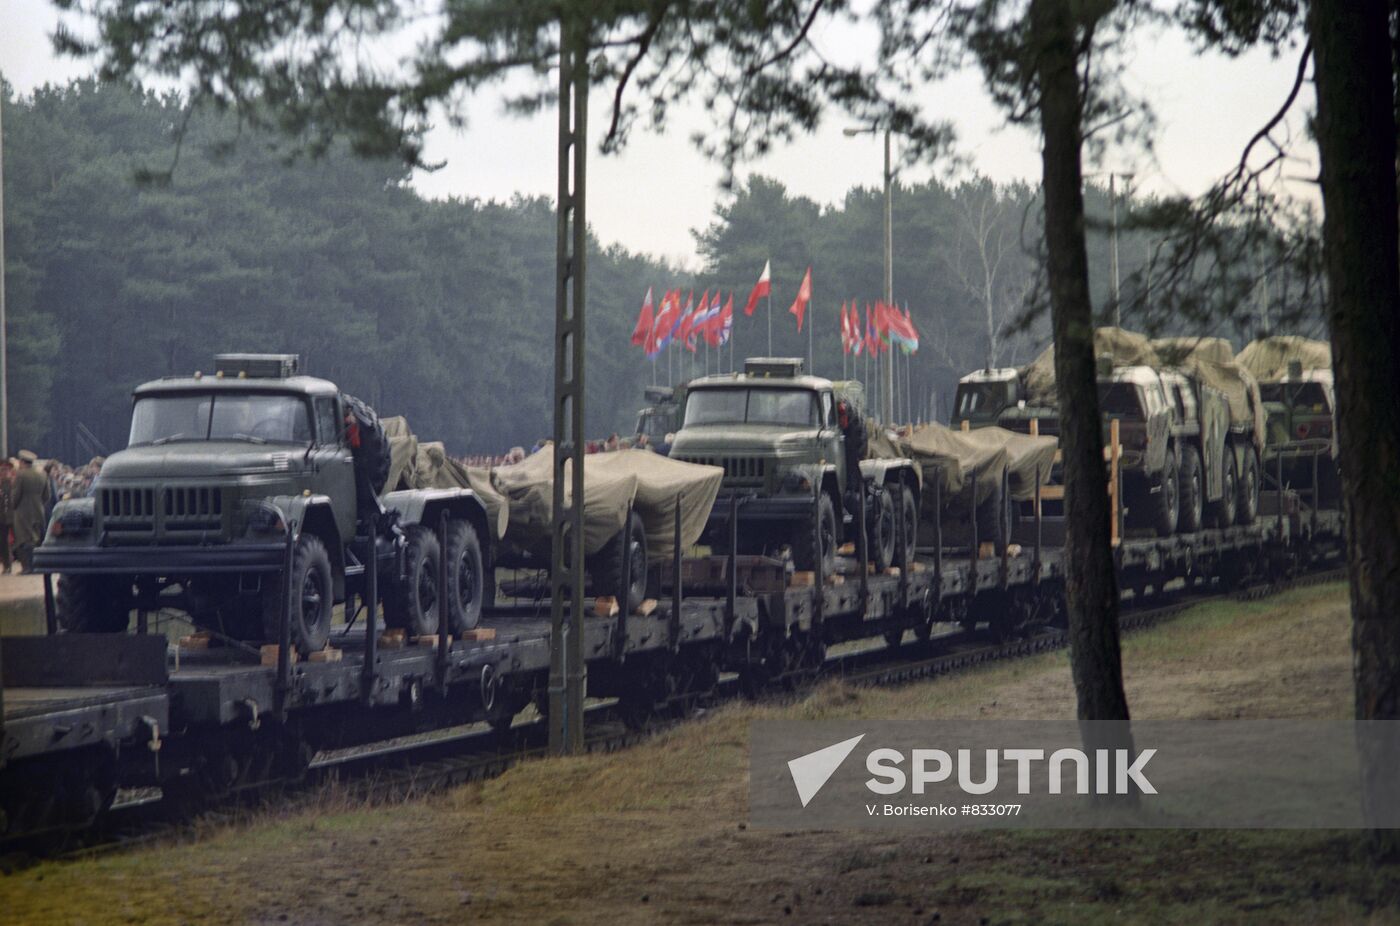 Withdrawal of Soviet troops from Poland